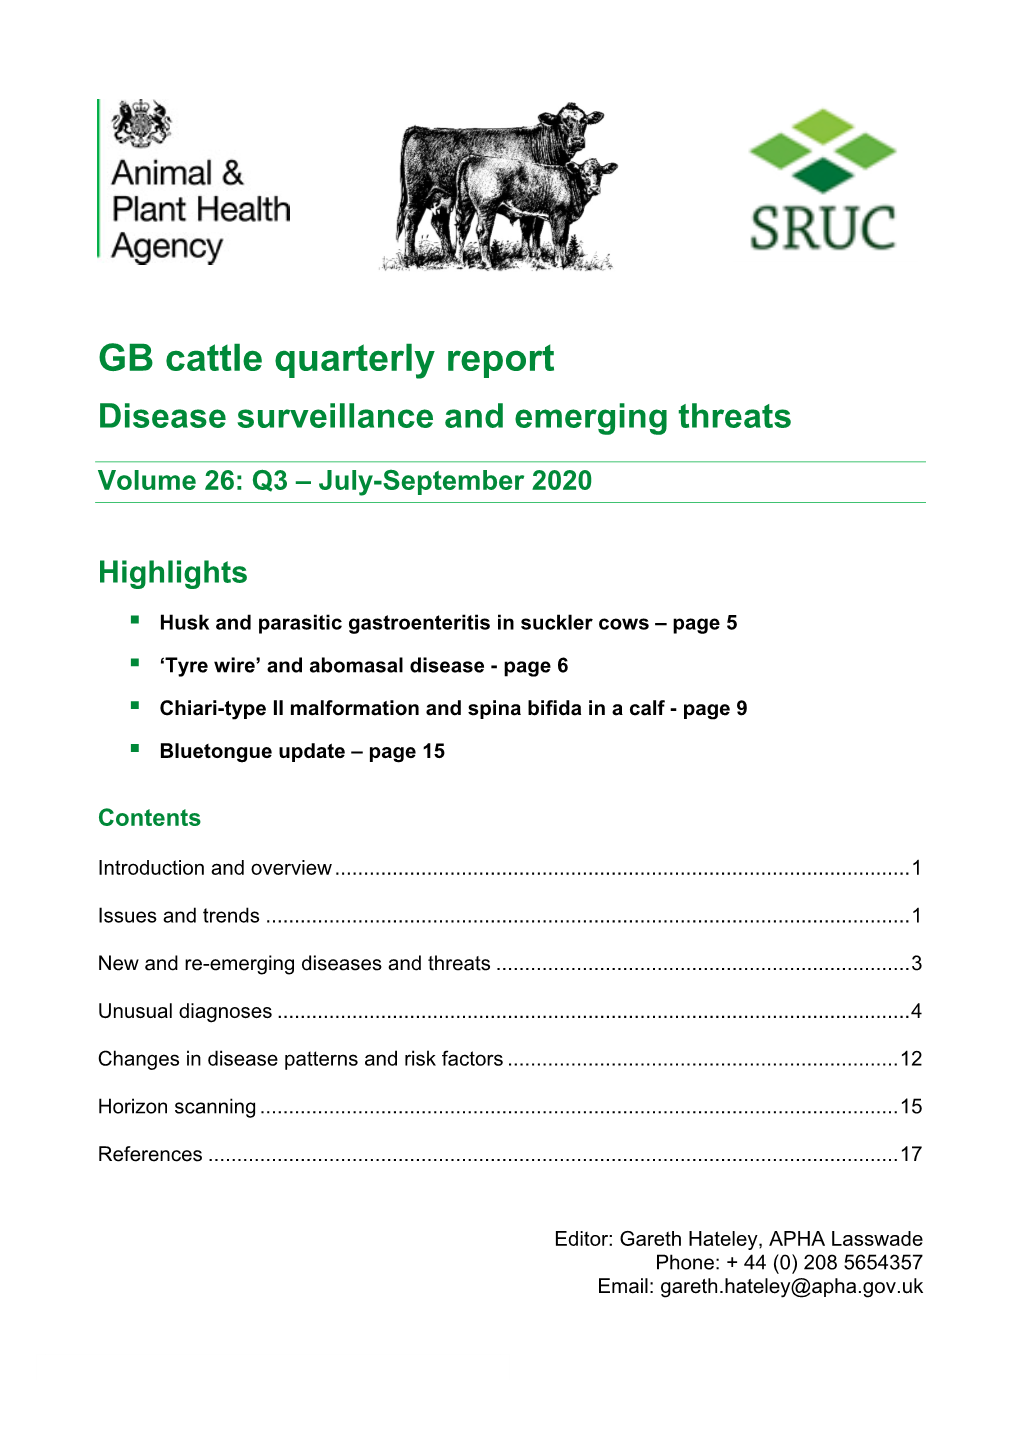 GB Cattle Quarterly Report Disease Surveillance and Emerging Threats